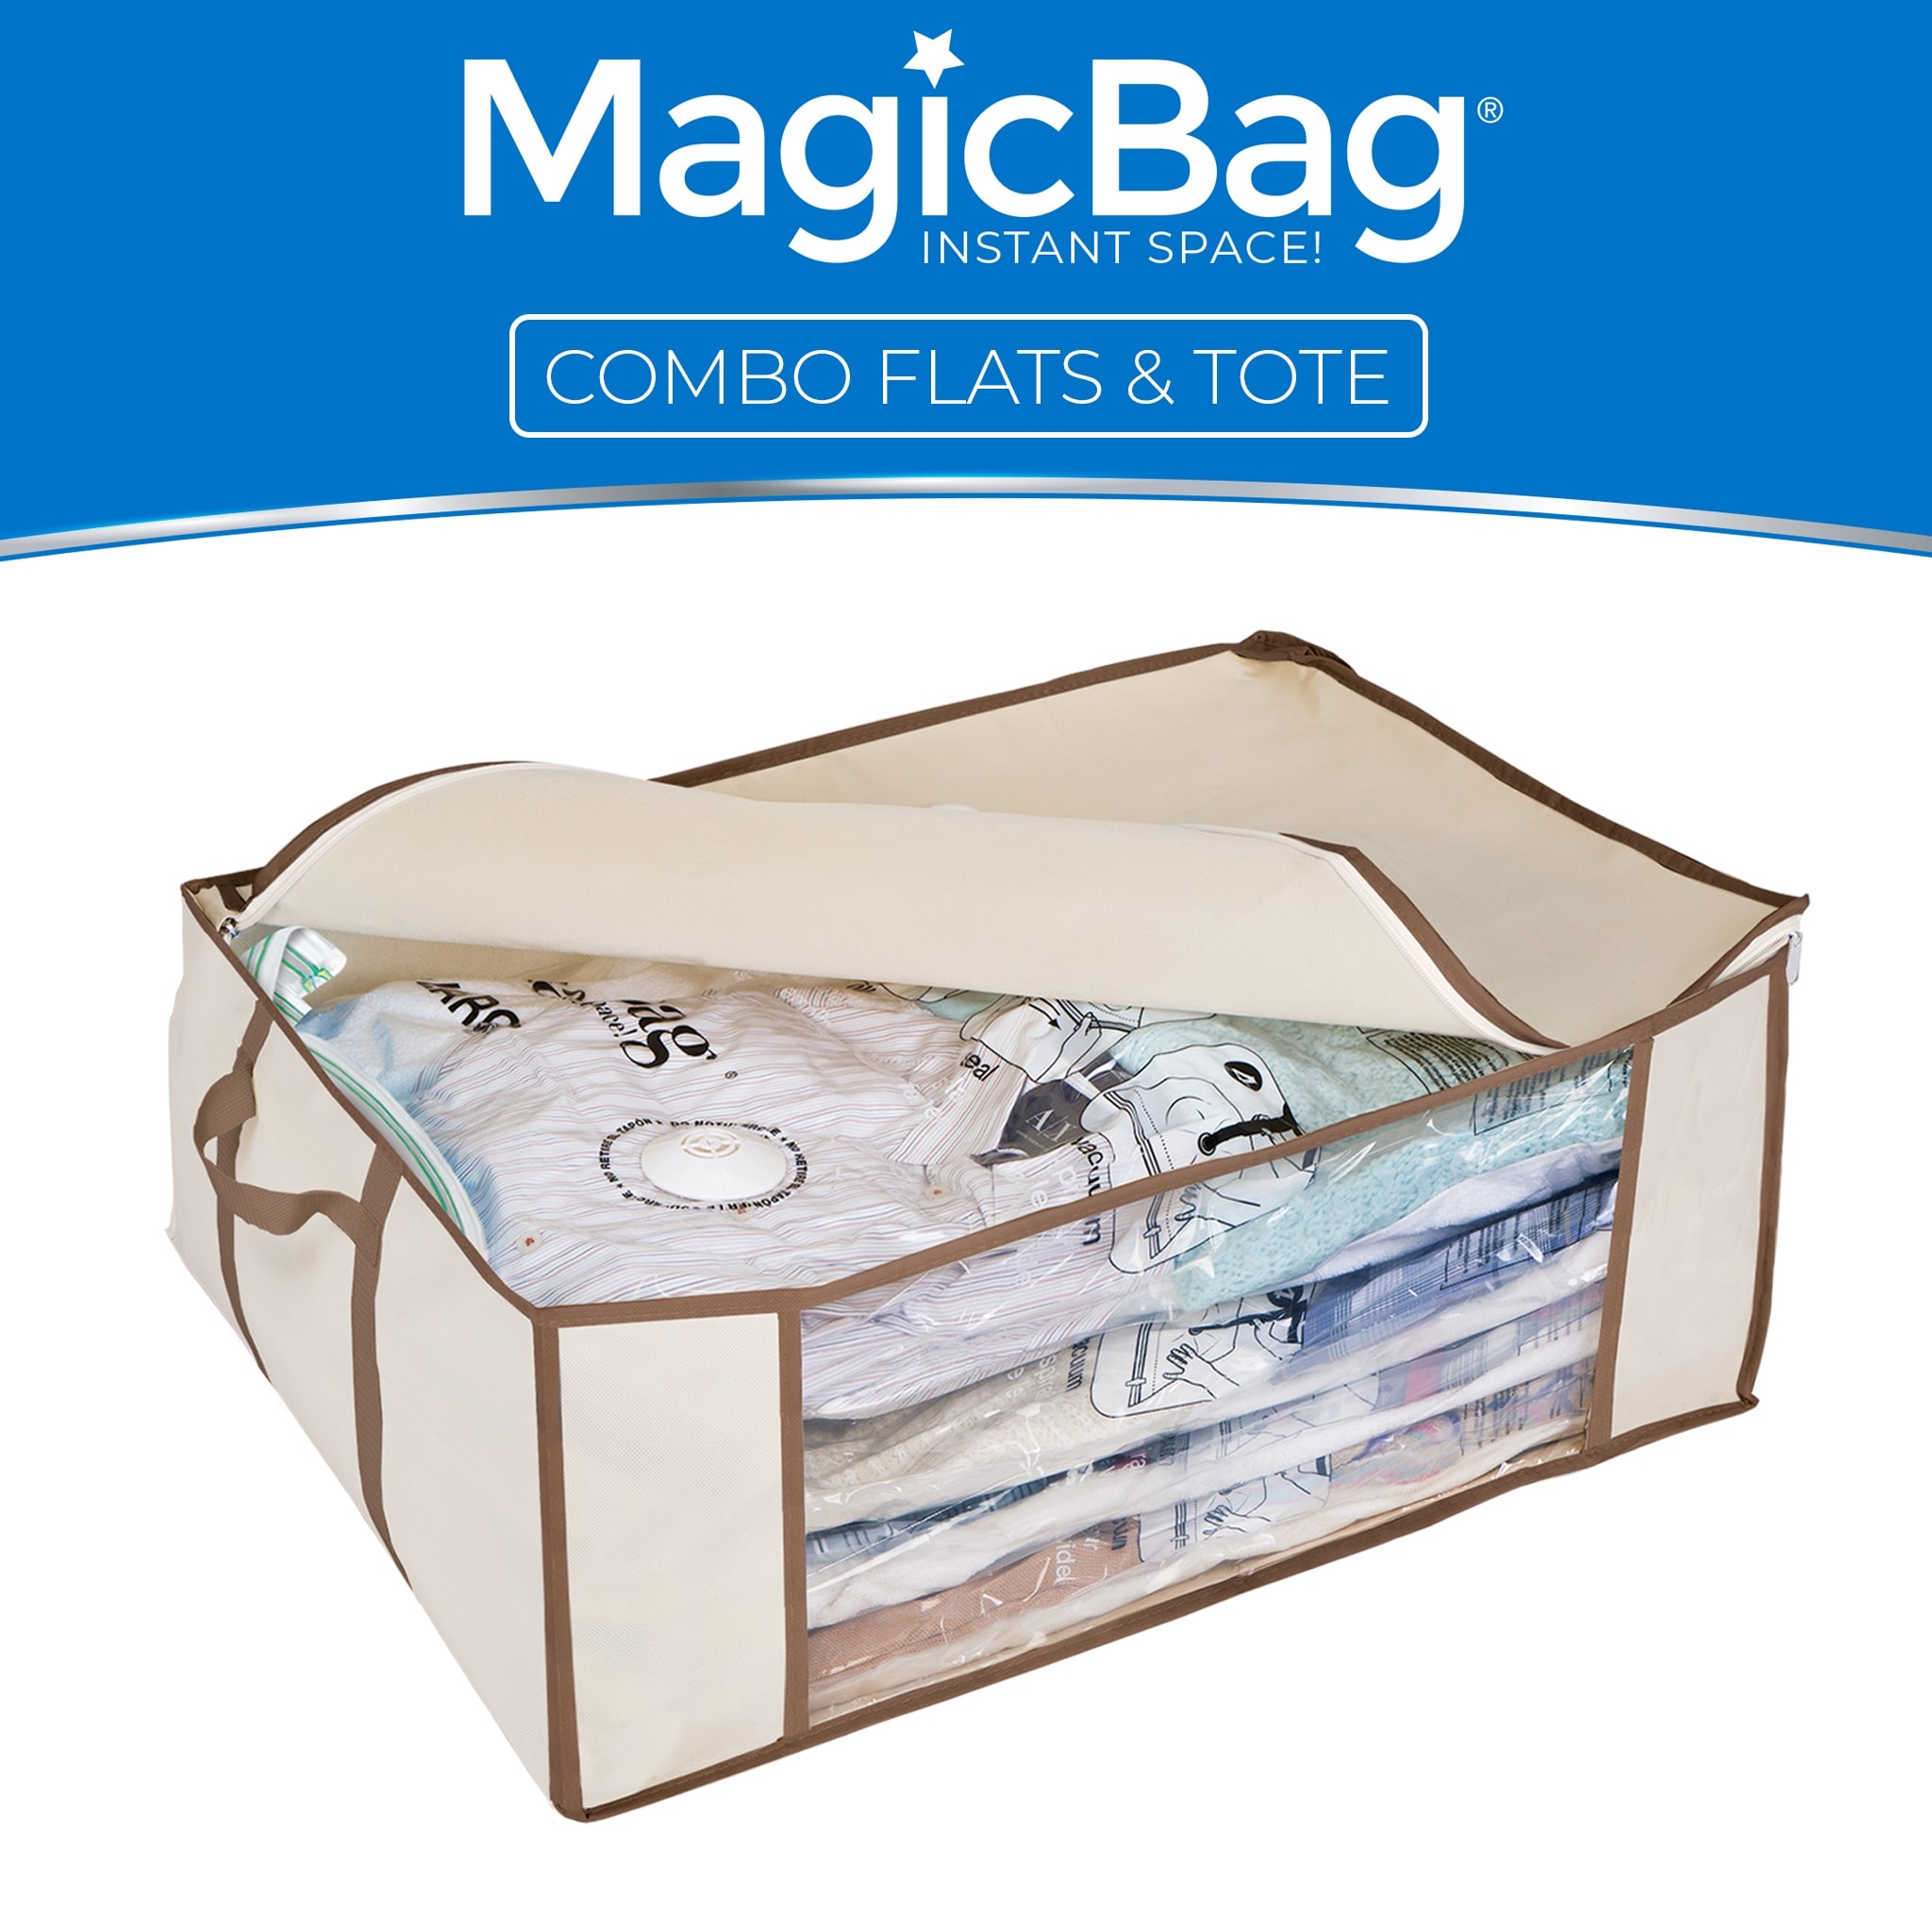 https://ak1.ostkcdn.com/images/products/is/images/direct/50ed89a4726649ae26a562b0febec897a9ae330f/MagicBag-Instant-Space-Saver-Storage---1-Jumbo-Tote-with-4-Large-Flat-Compression-Bags.jpg